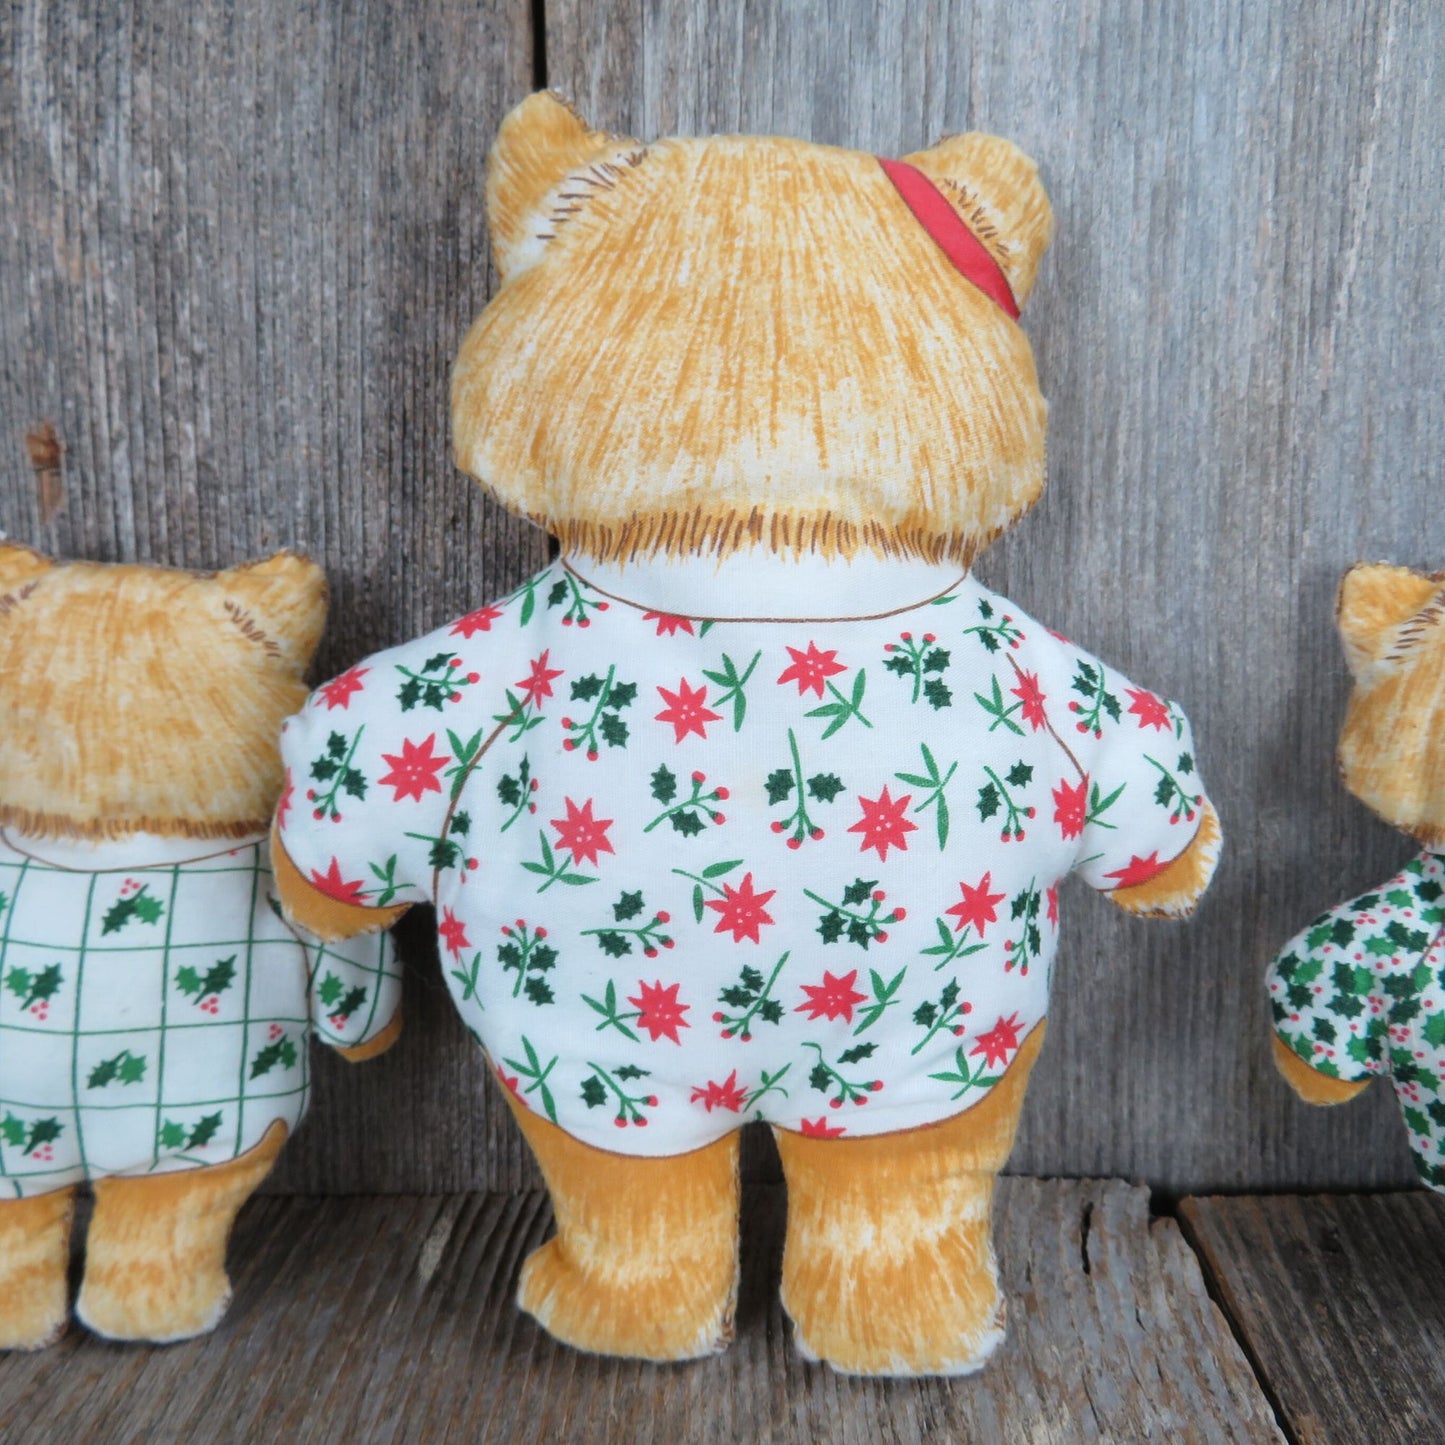 Three Little Kittens Pillow Dolls Cut and Sew Christmas Cats in Pajamas Fabric Stuffed Animal Set